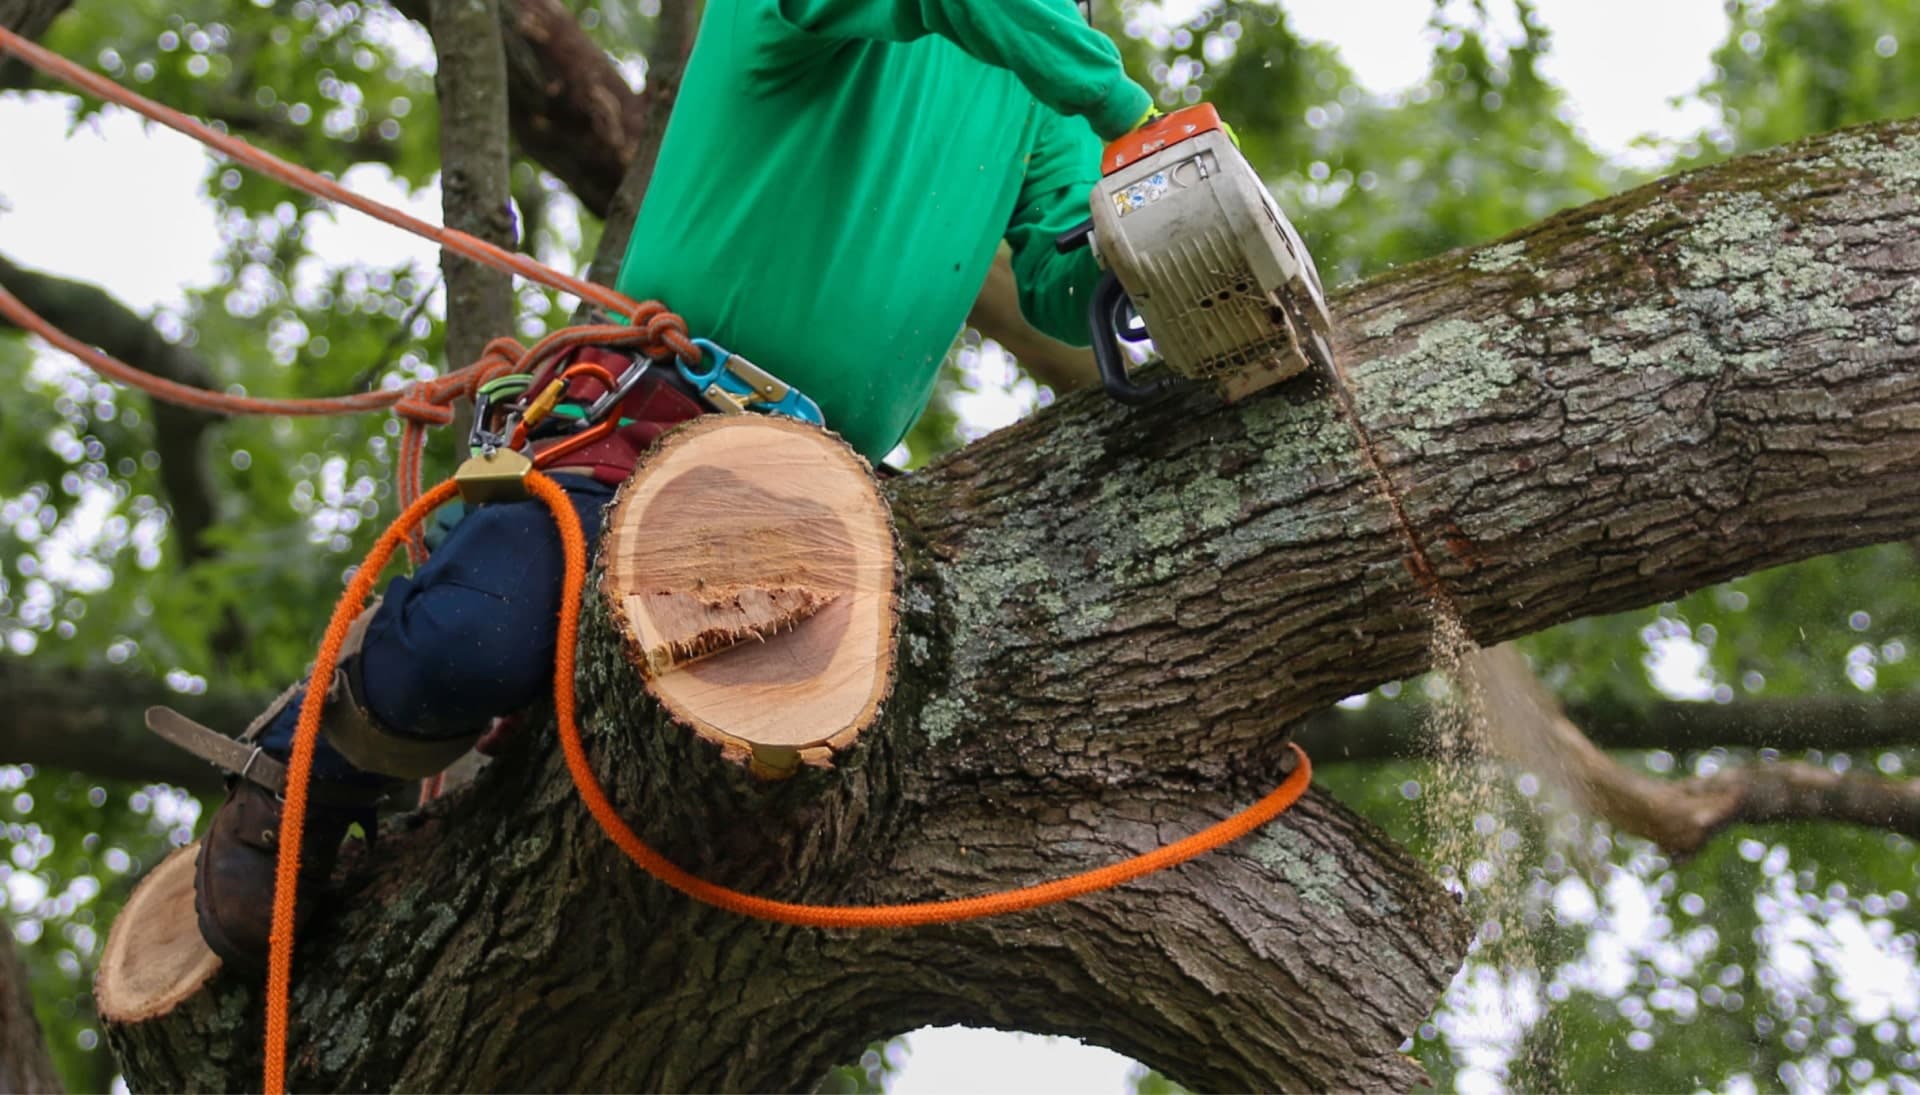 Shed your worries away with best tree removal in Fort Lauderdale